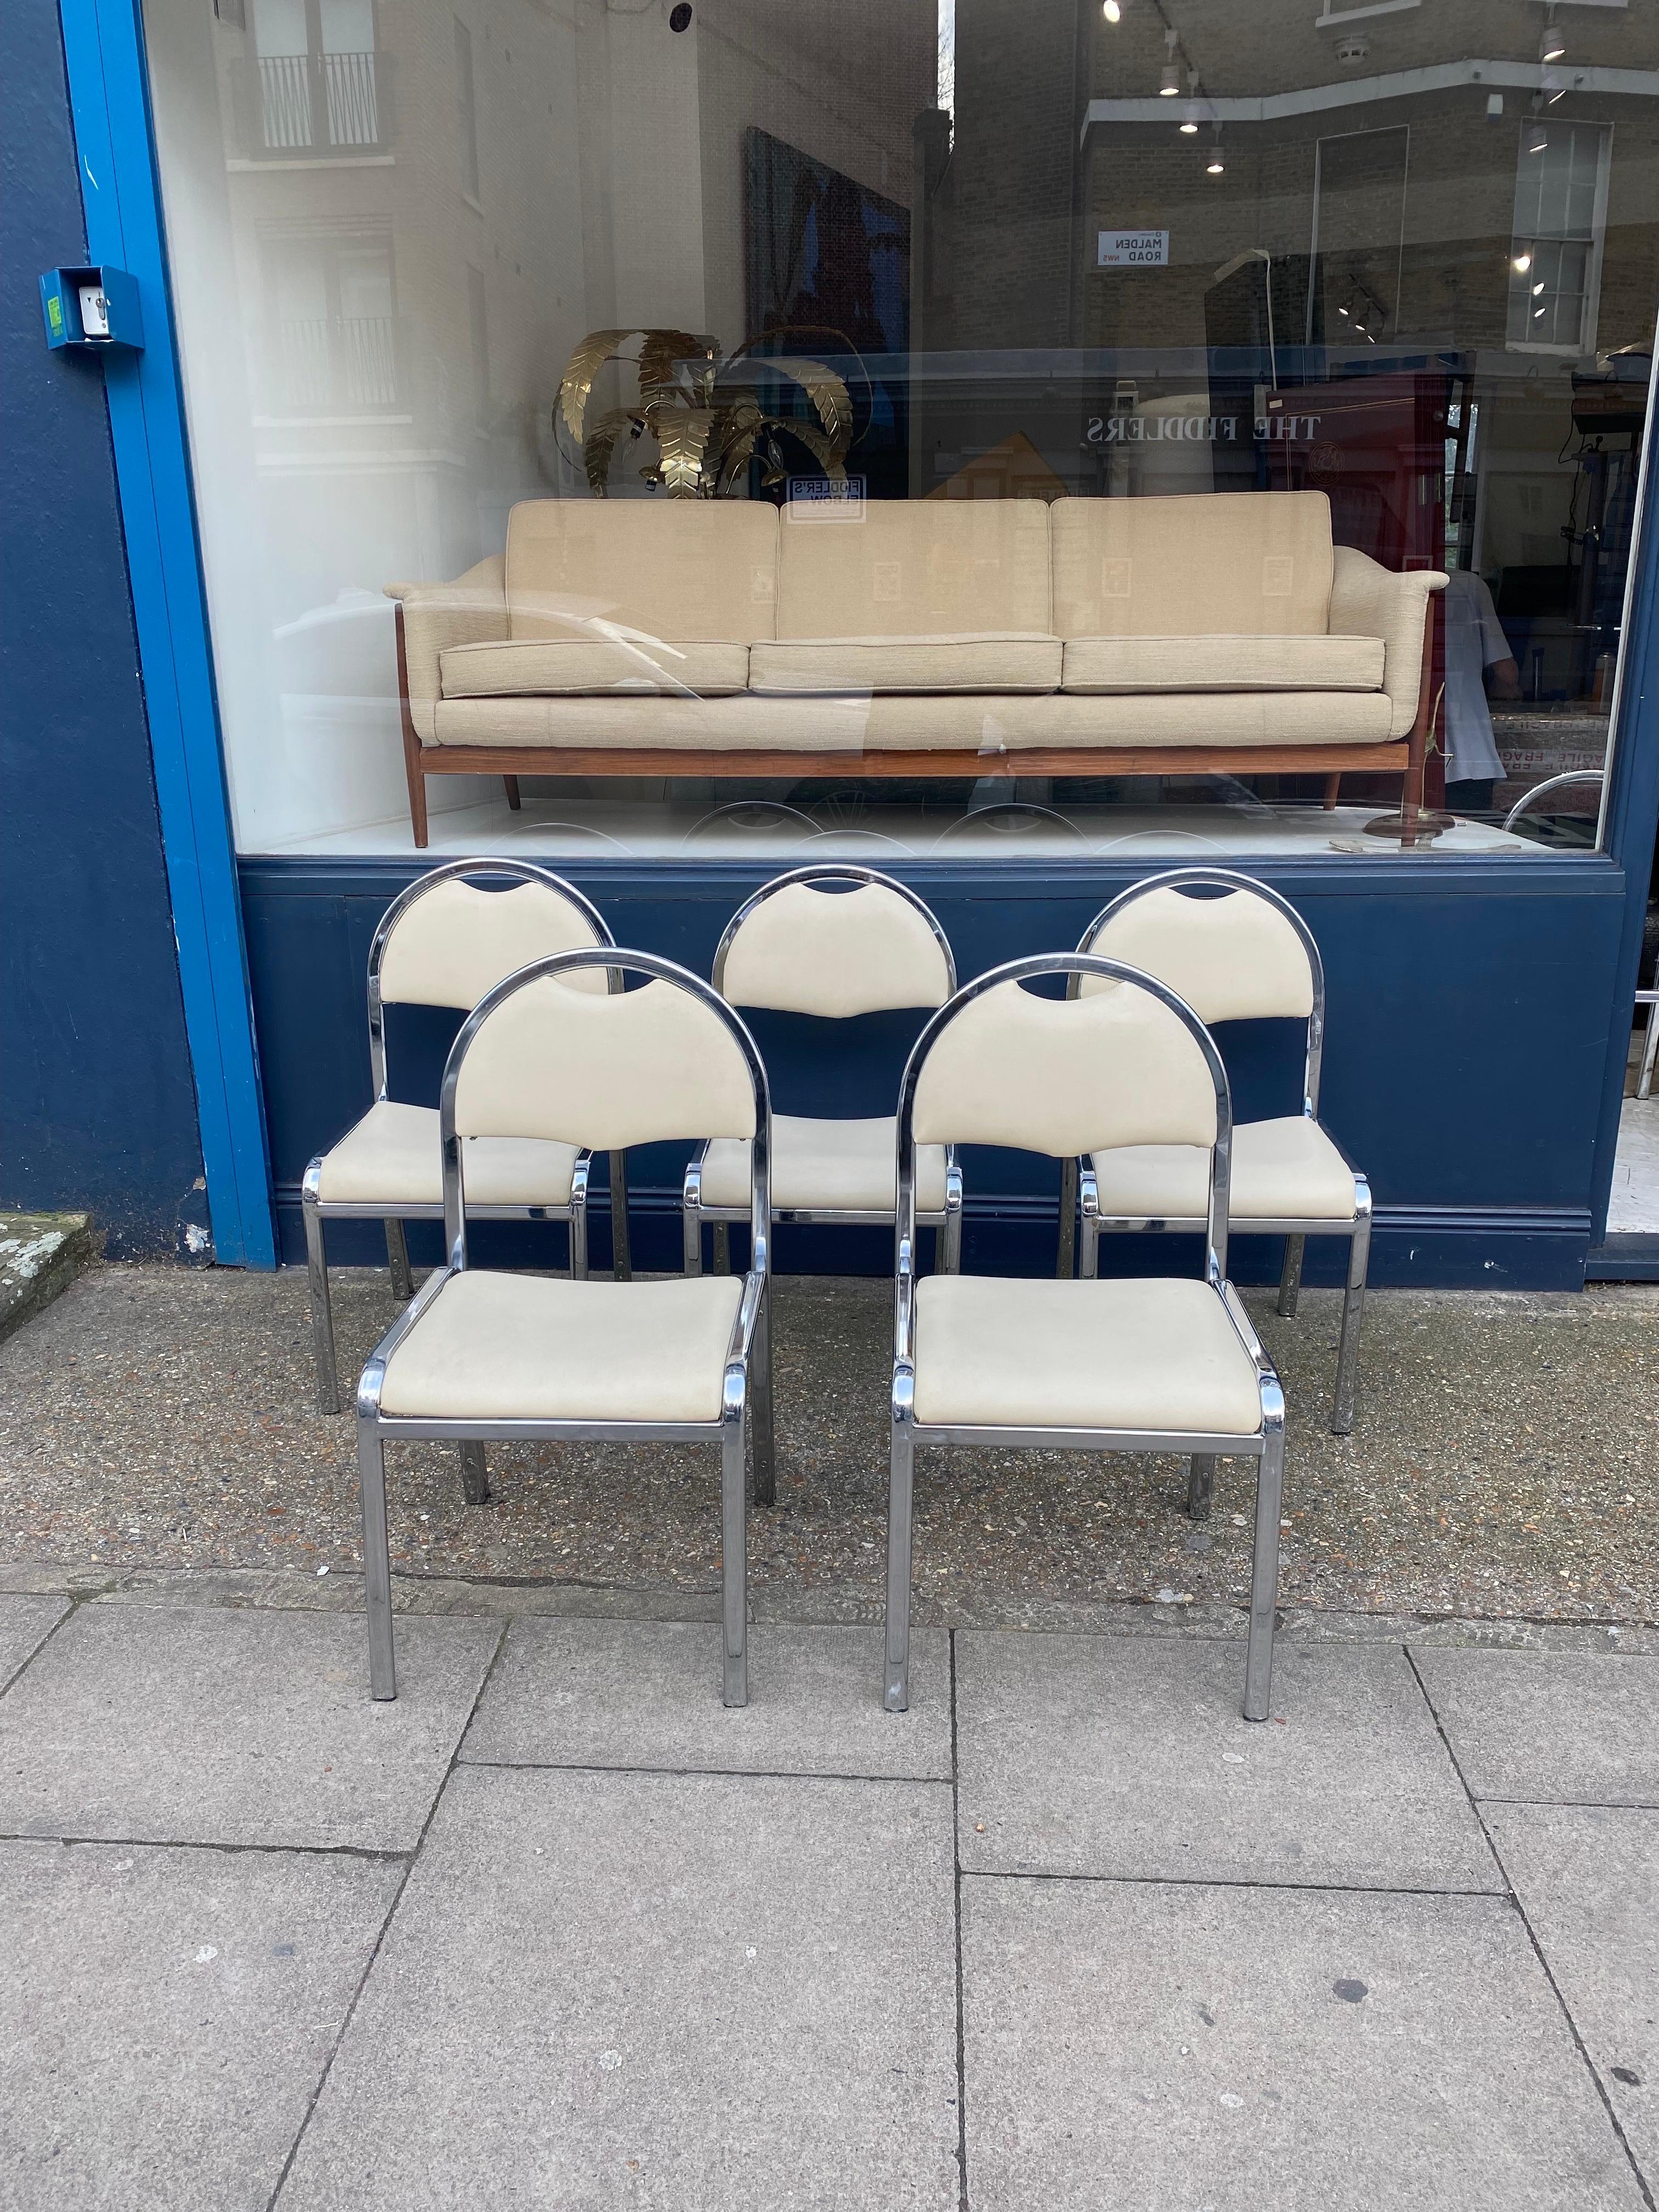 Italian chrome set of five dining chairs in beige leatherette. Double layered chrome curved tube frames with arched back with nicely designed pull on the top of the back rest. The leatherette is overall in good condition with some light signs of